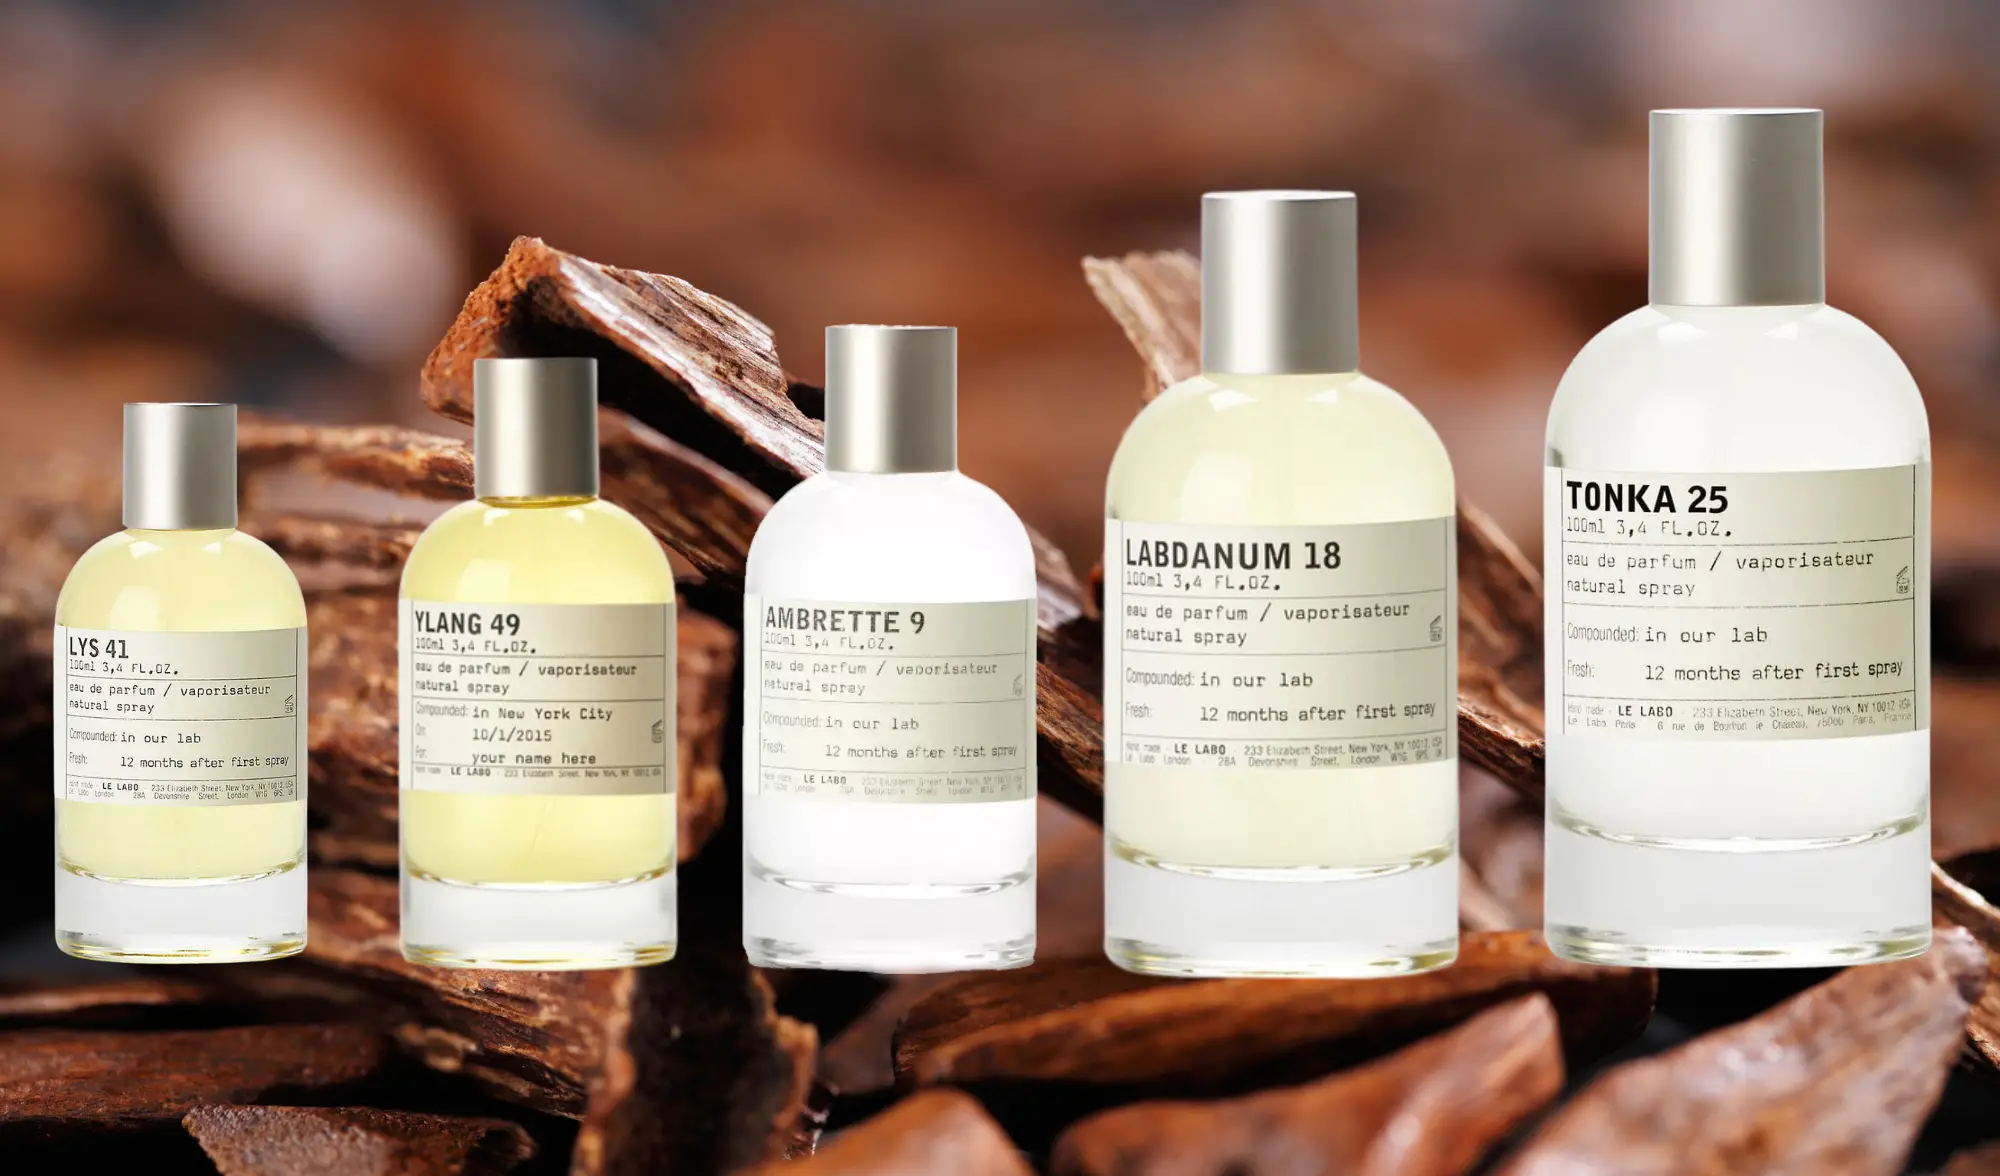 The Ultimate Guide To The Le Labo Fragrances